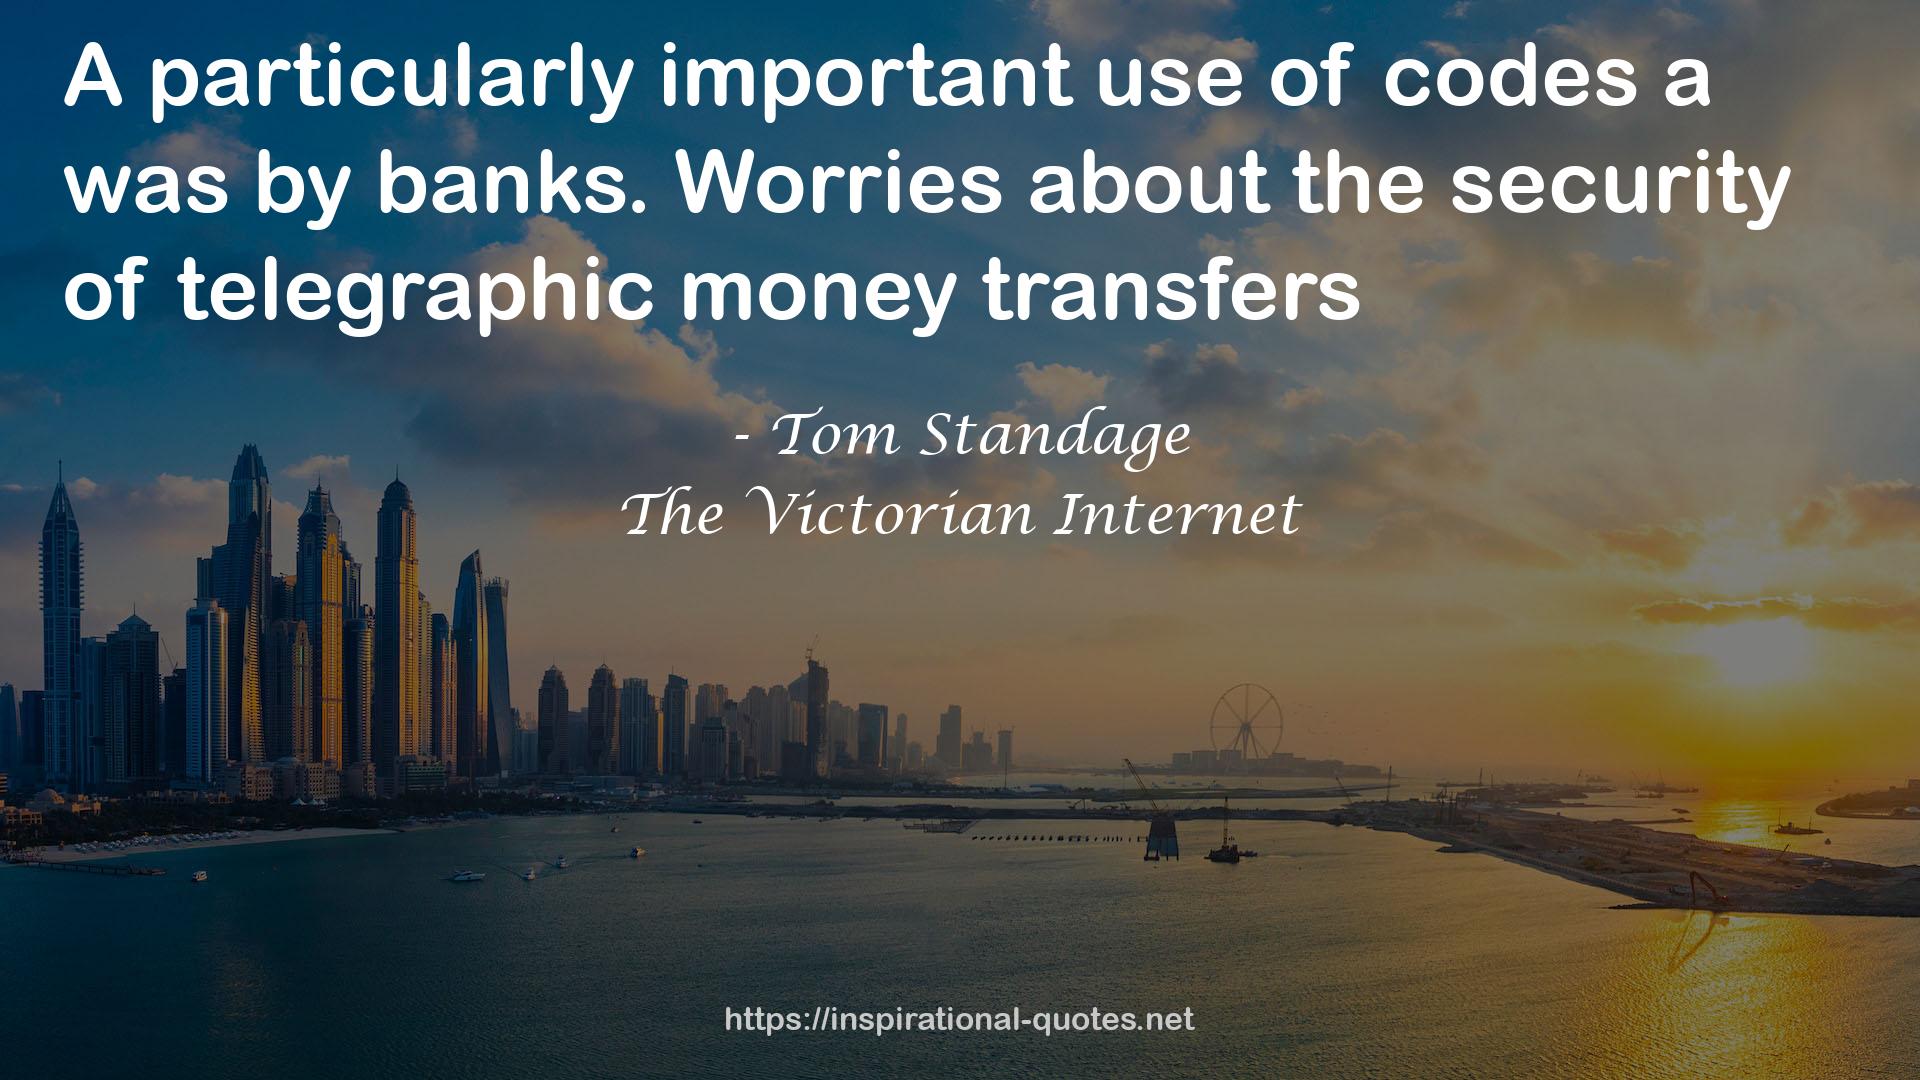 The Victorian Internet QUOTES